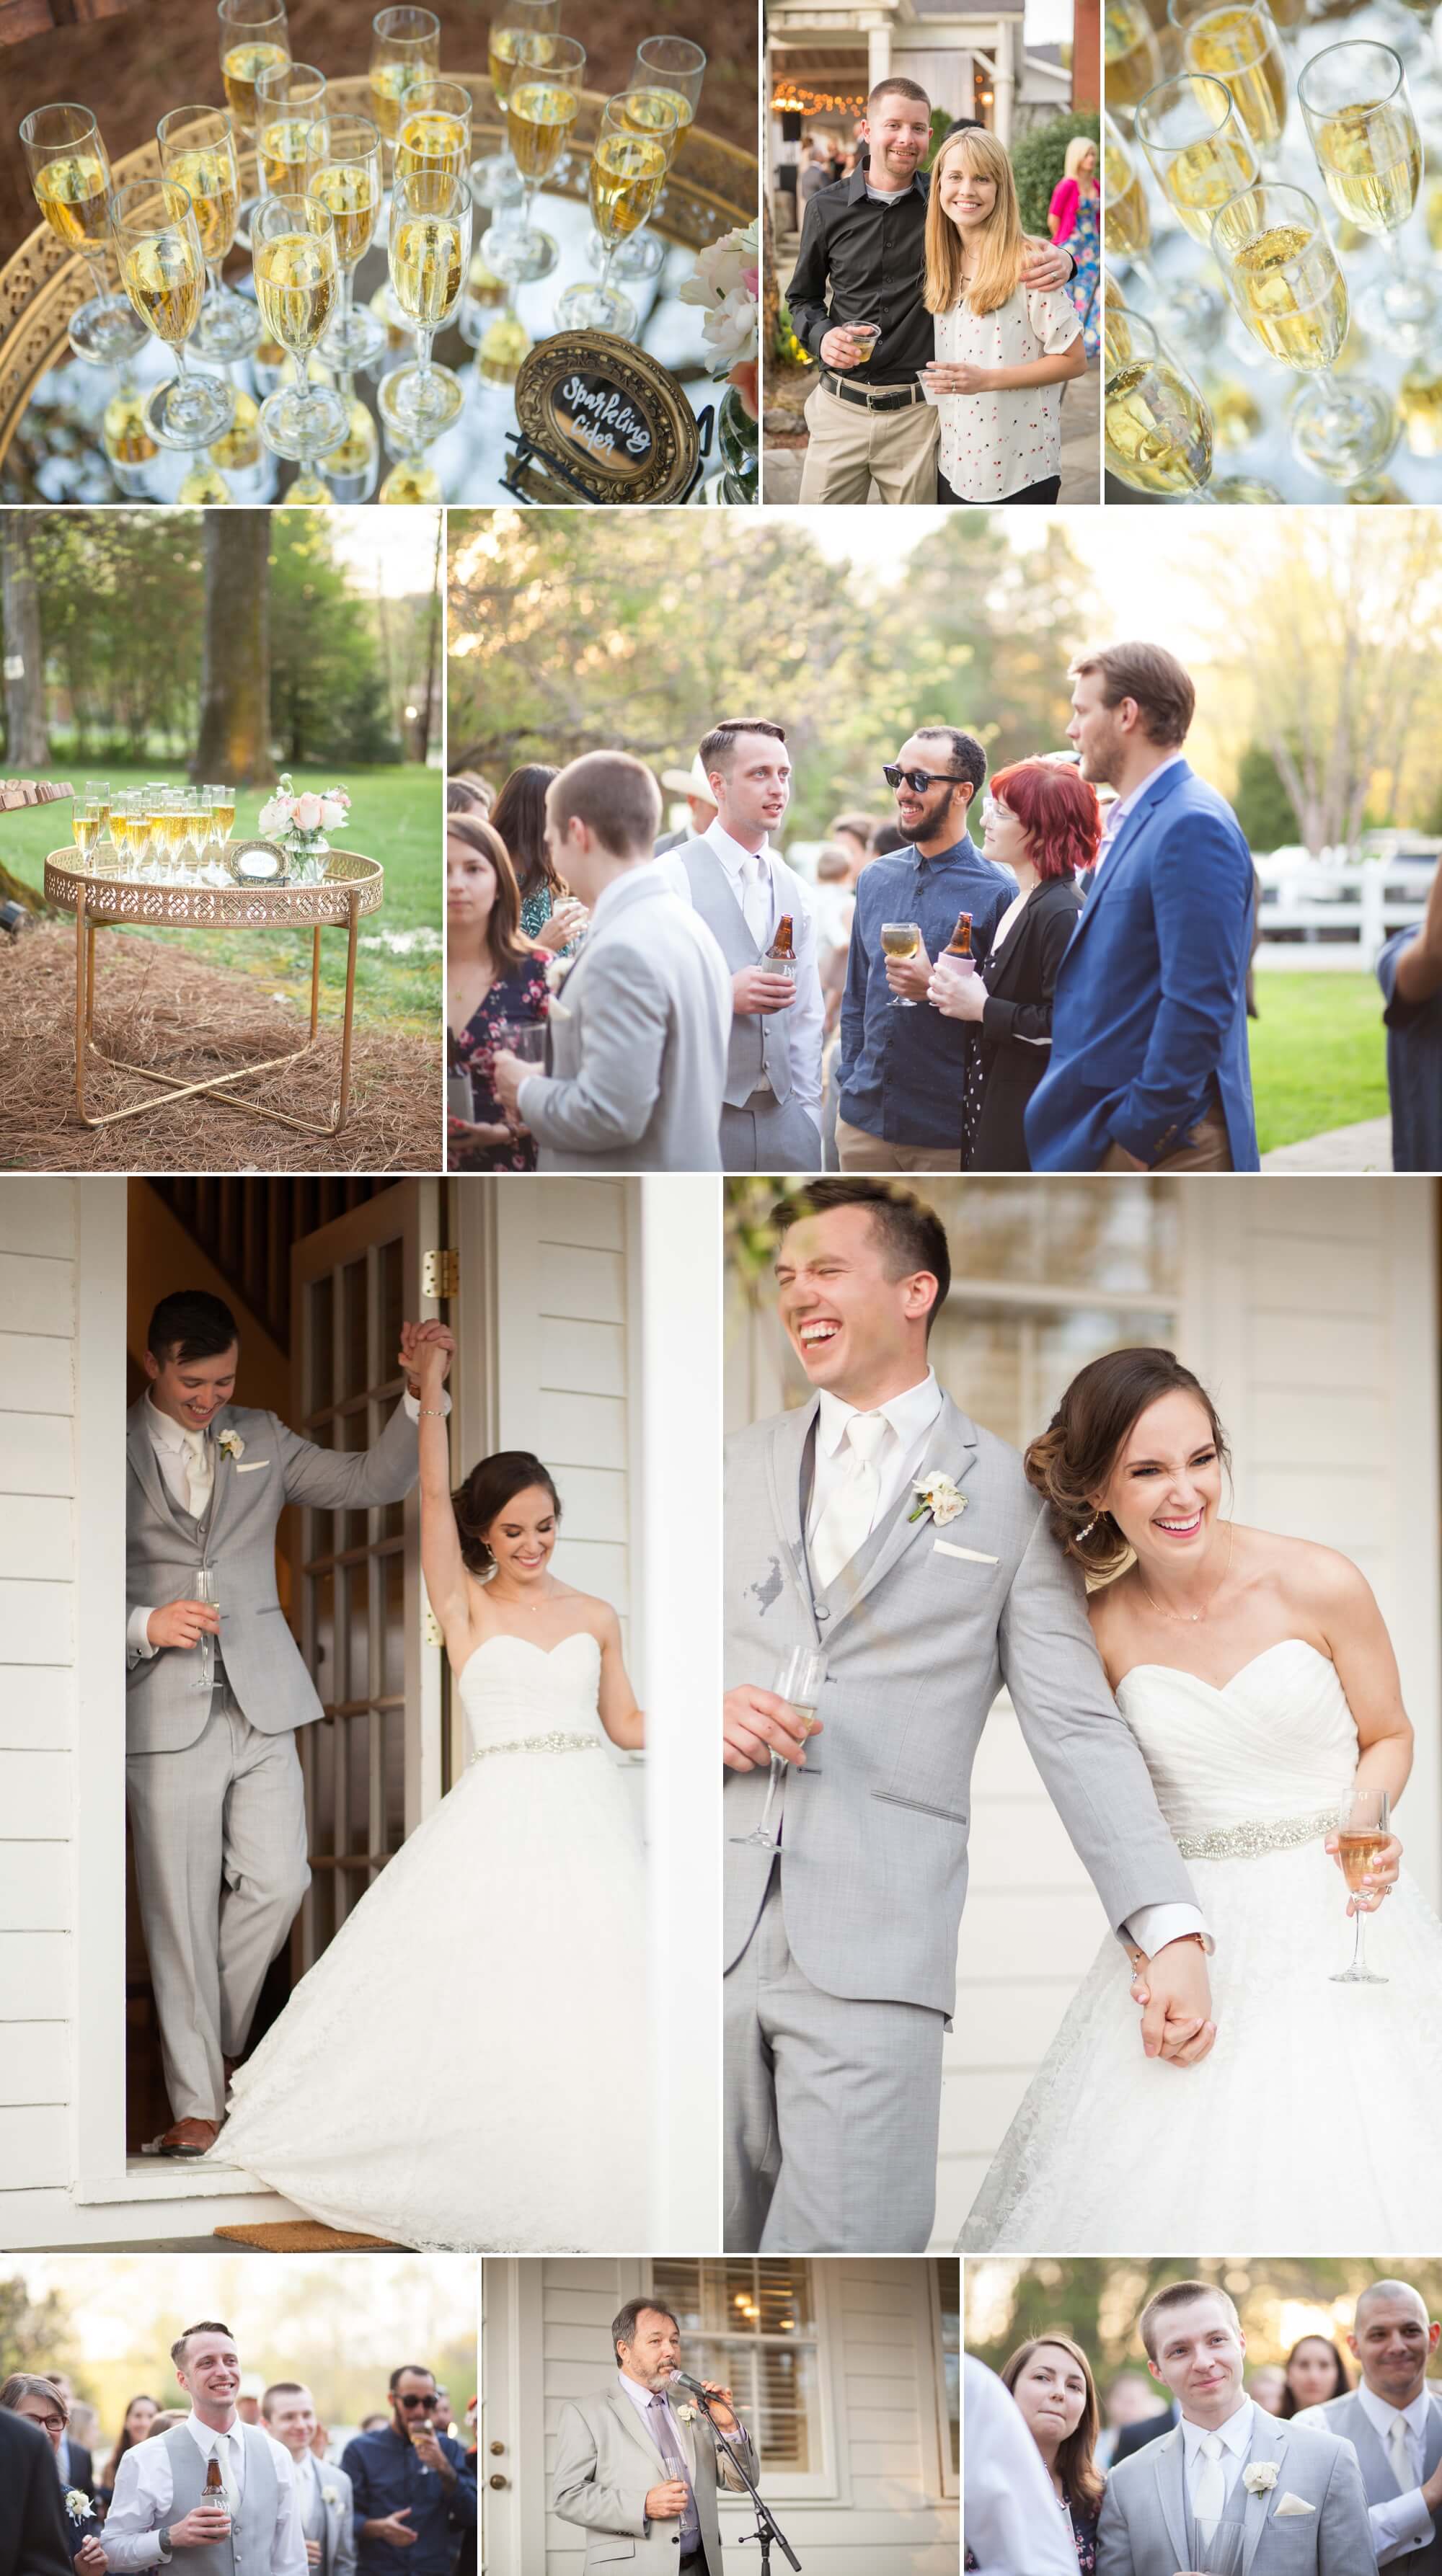 Cocktail hour and bride and groom introduction onto front porch. Spring wedding at Cedarwood Weddings in Nashville, TN. Photo by Krista Lee Photography, from Sam and Izzy's wedding day.